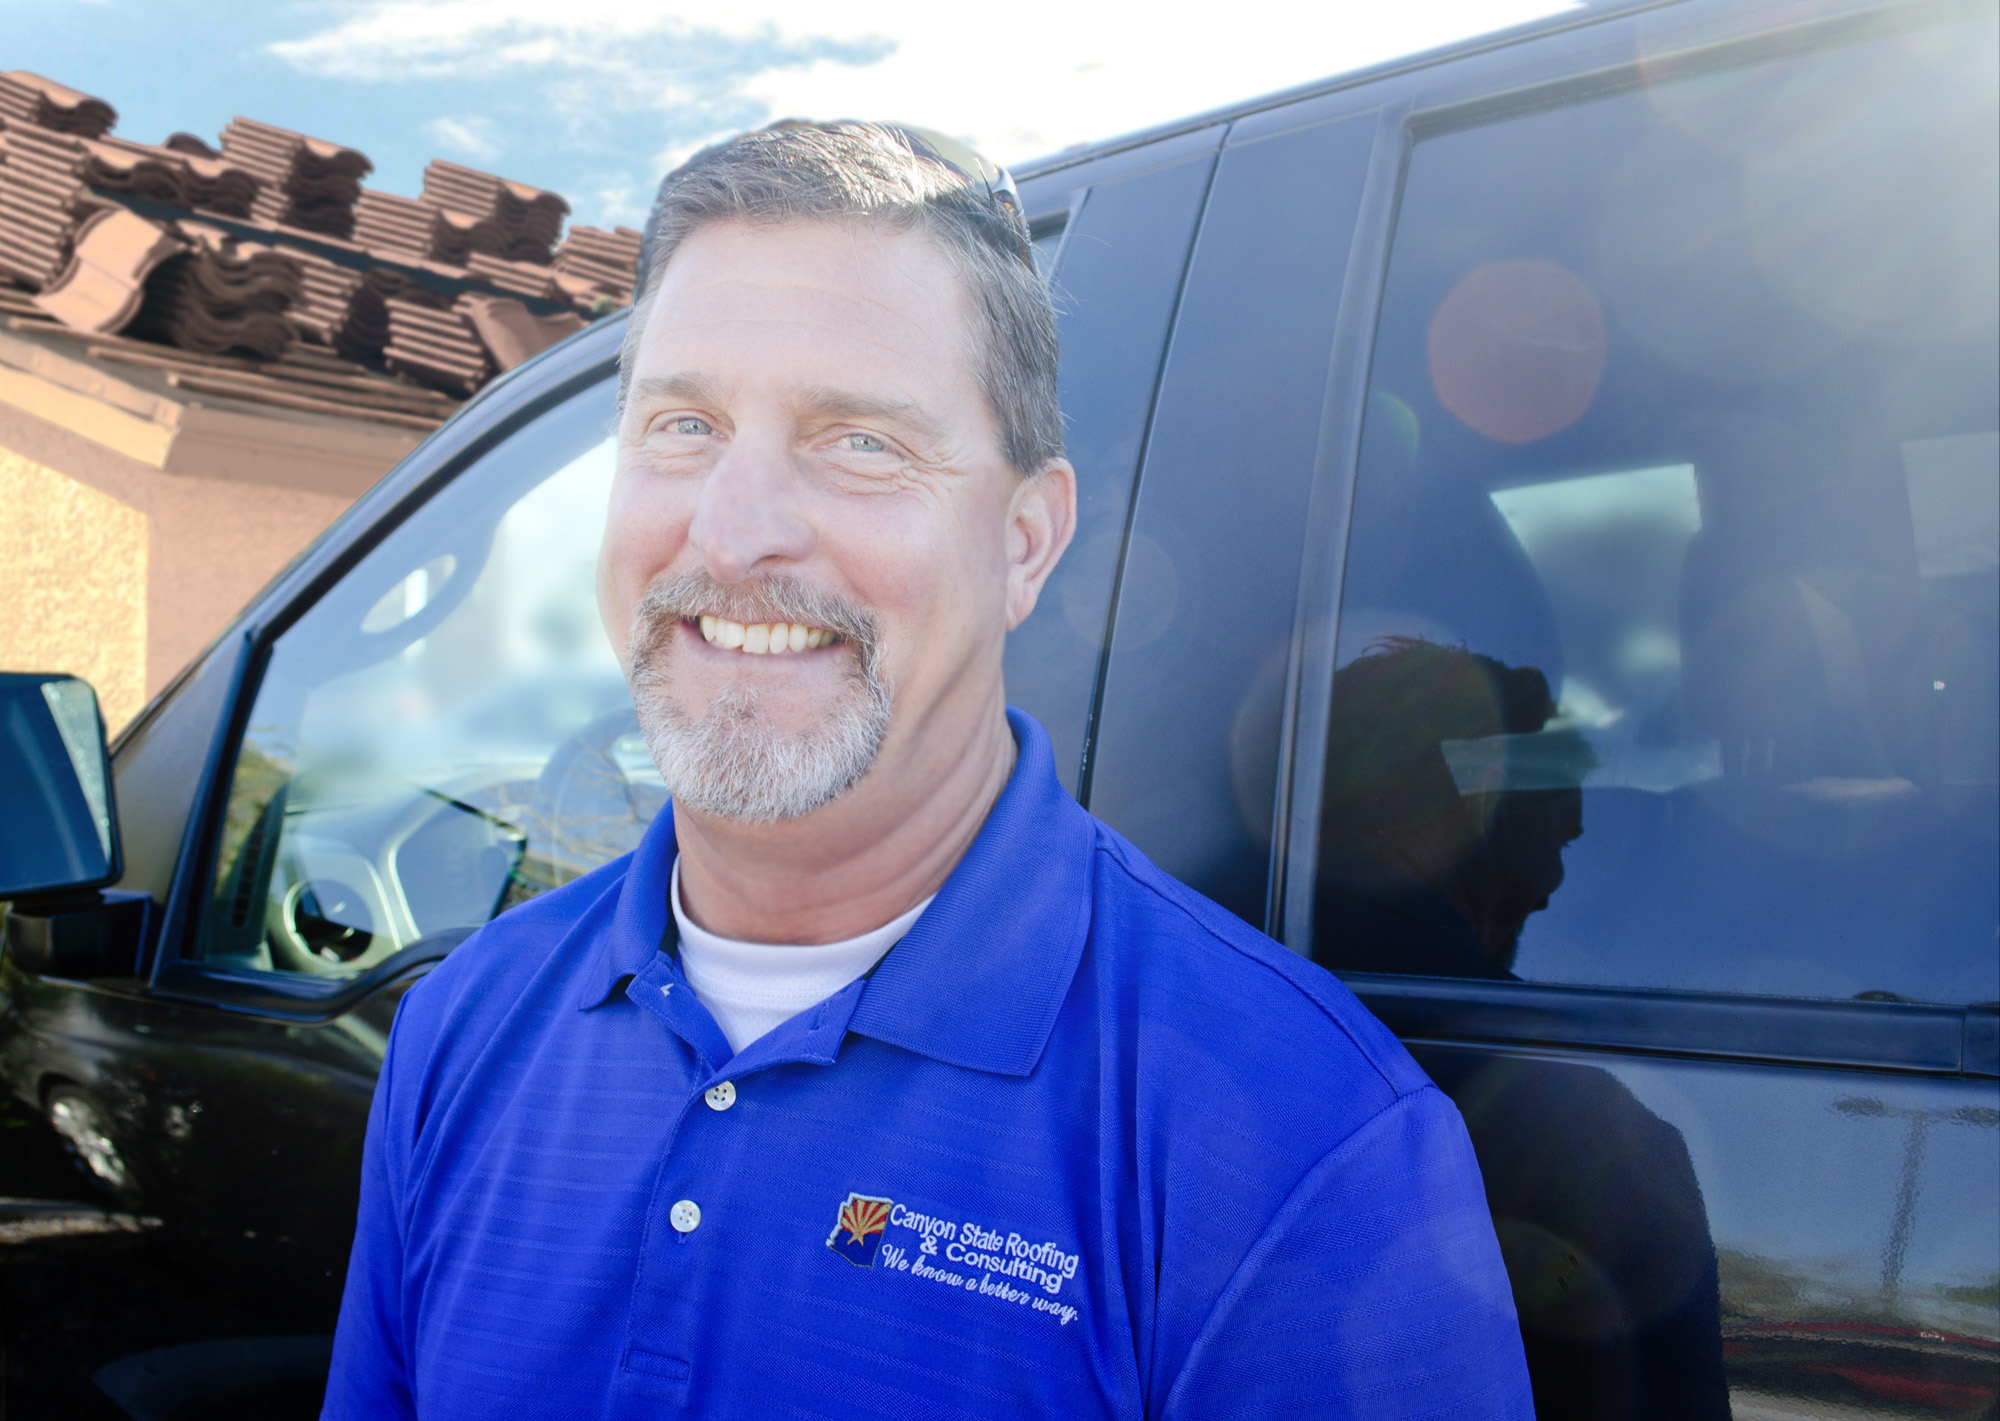 Owner of Canyon State Roofing &amp; Consulting'